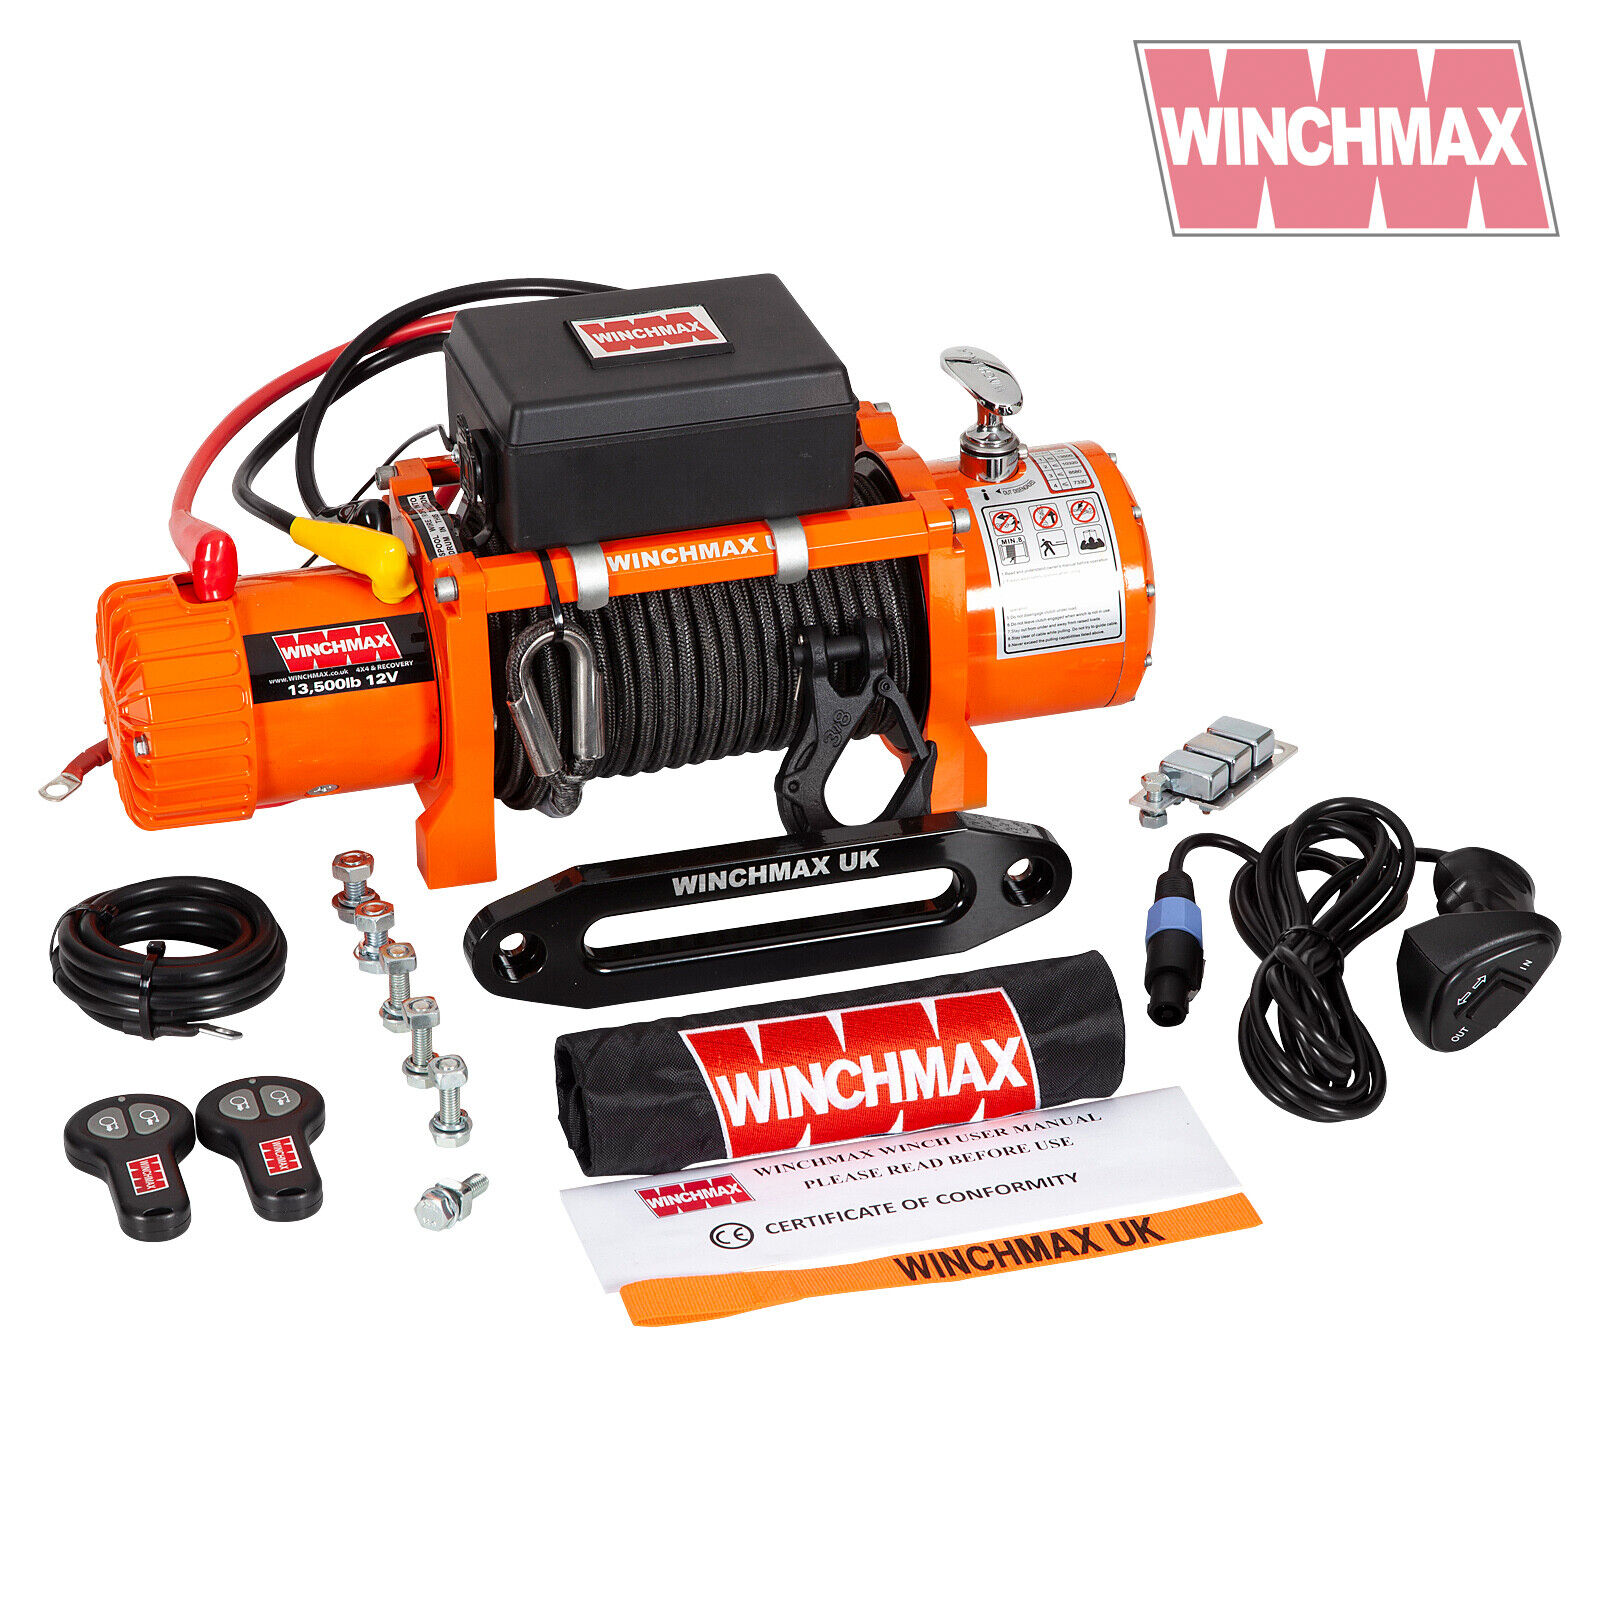 ELECTRIC WINCH 13500lb 12V ARMOURLINE ROPE WINCHMAX 4x4/RECOVERY